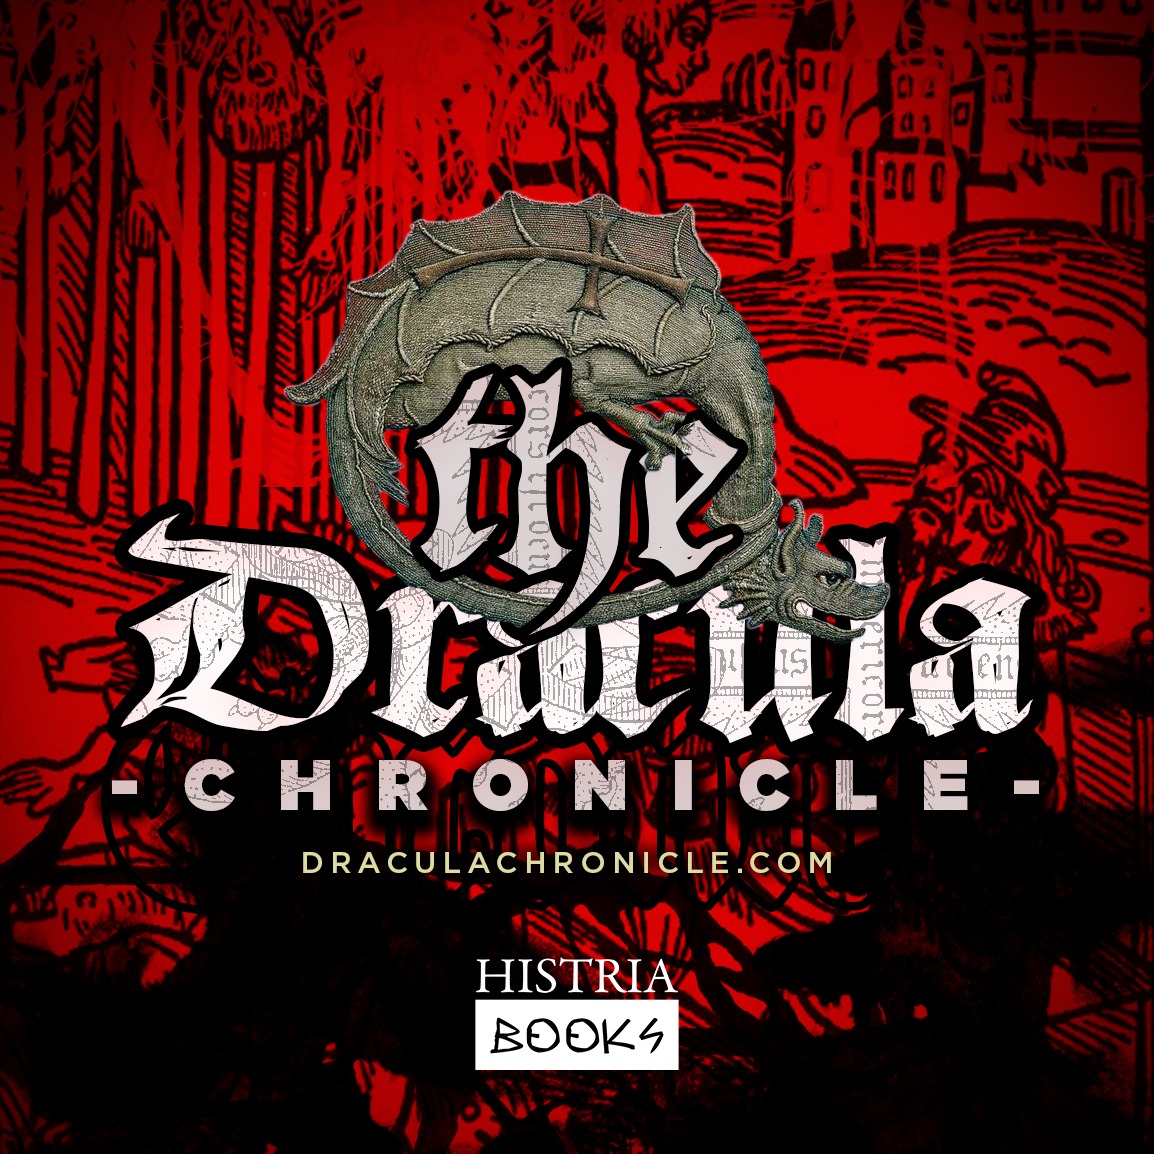 dracula essays on the life and times of vlad the impaler